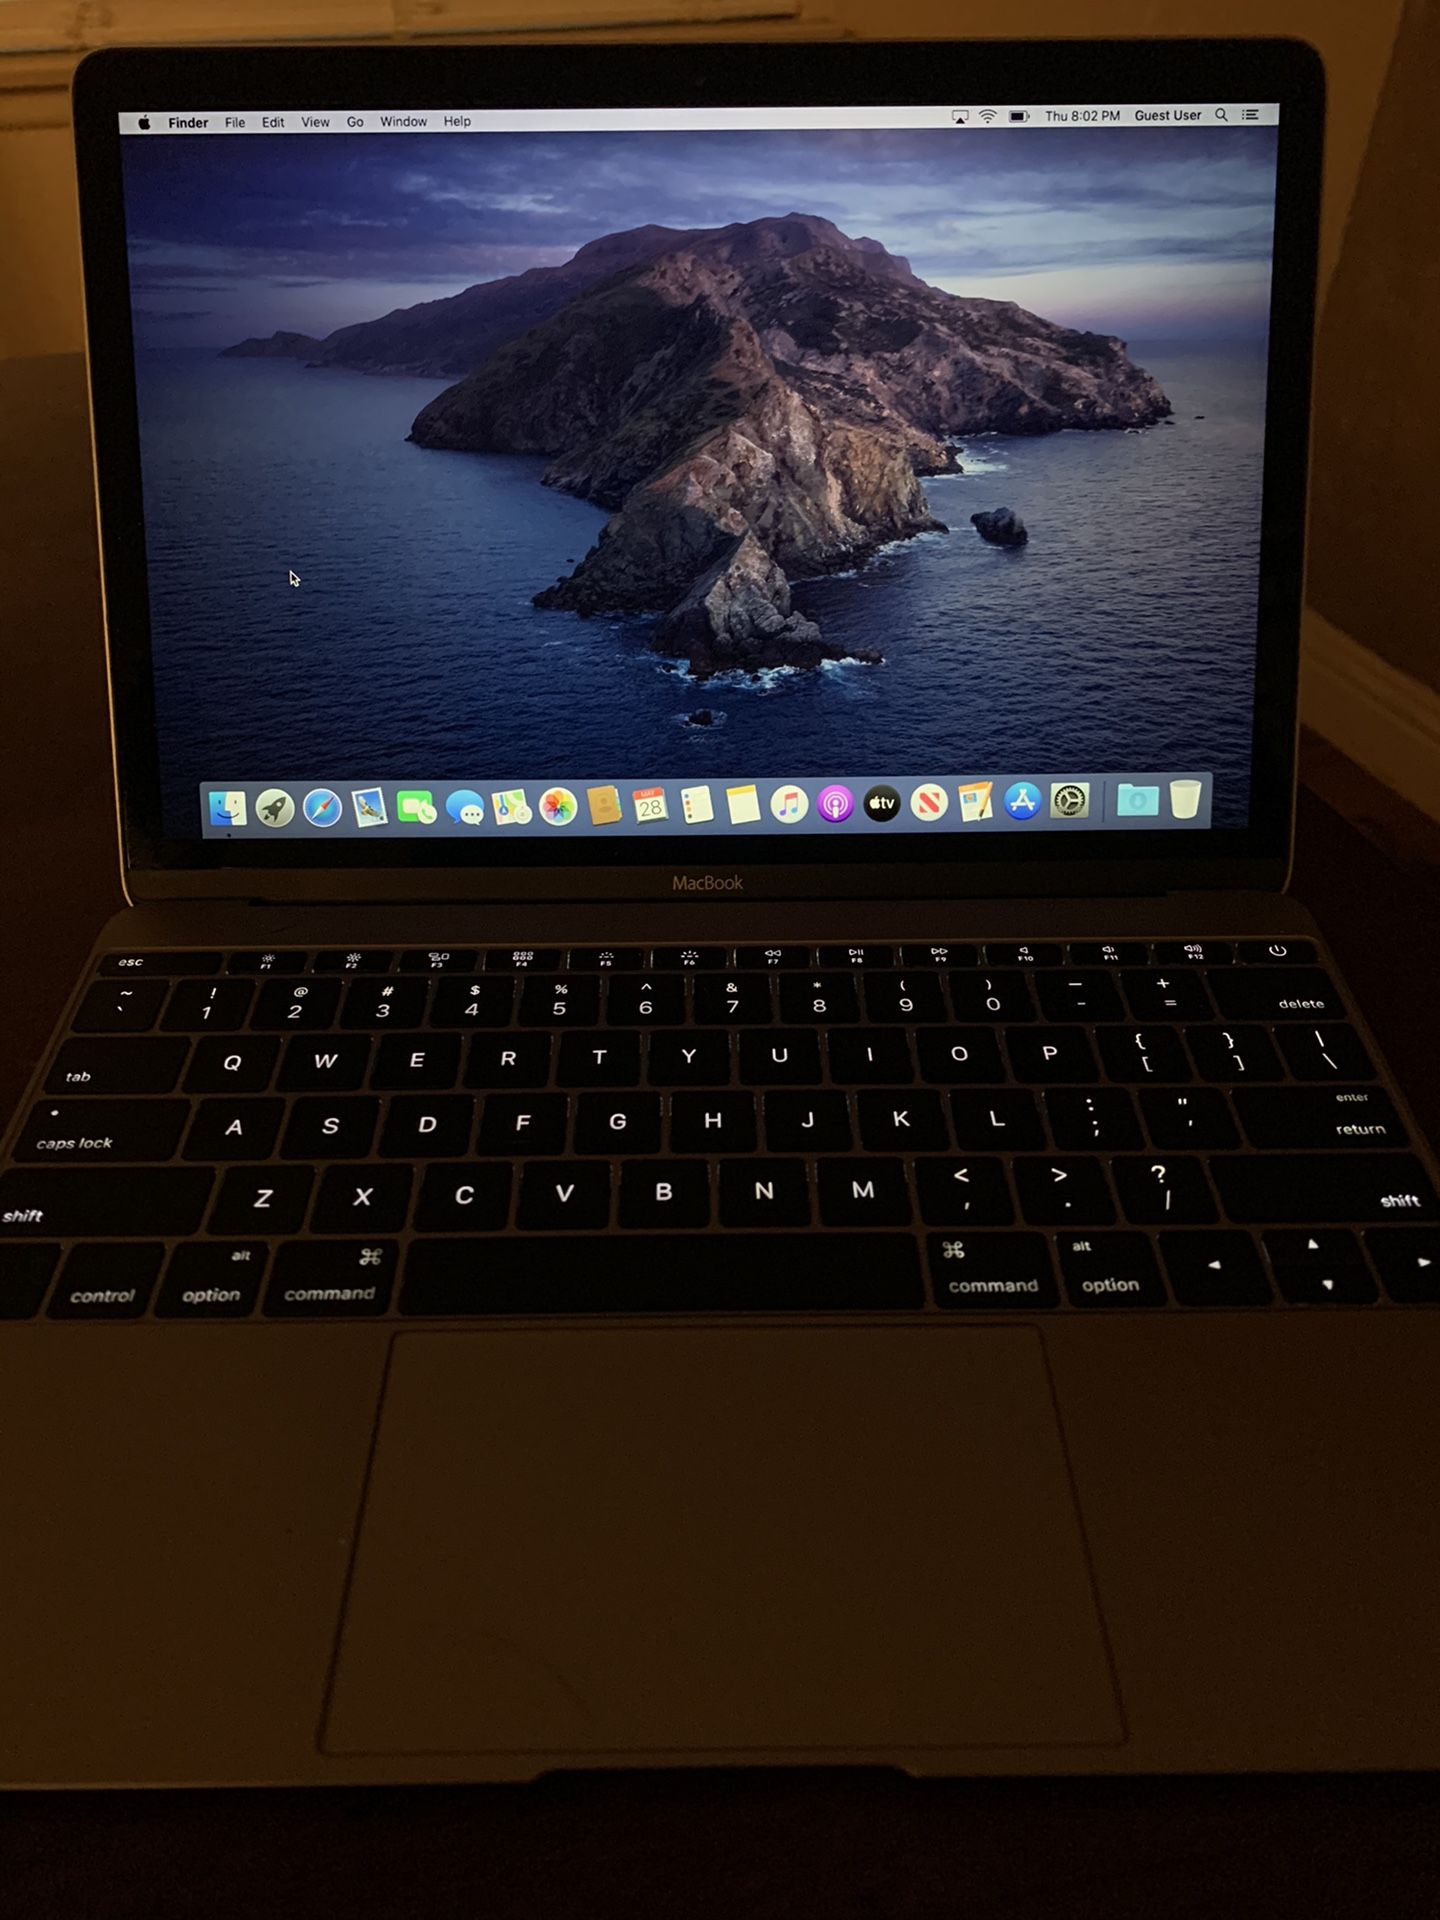 Apple MacBook 12'' 256 GB Space Gray Laptop - MLH72LL/A (April, 2016)